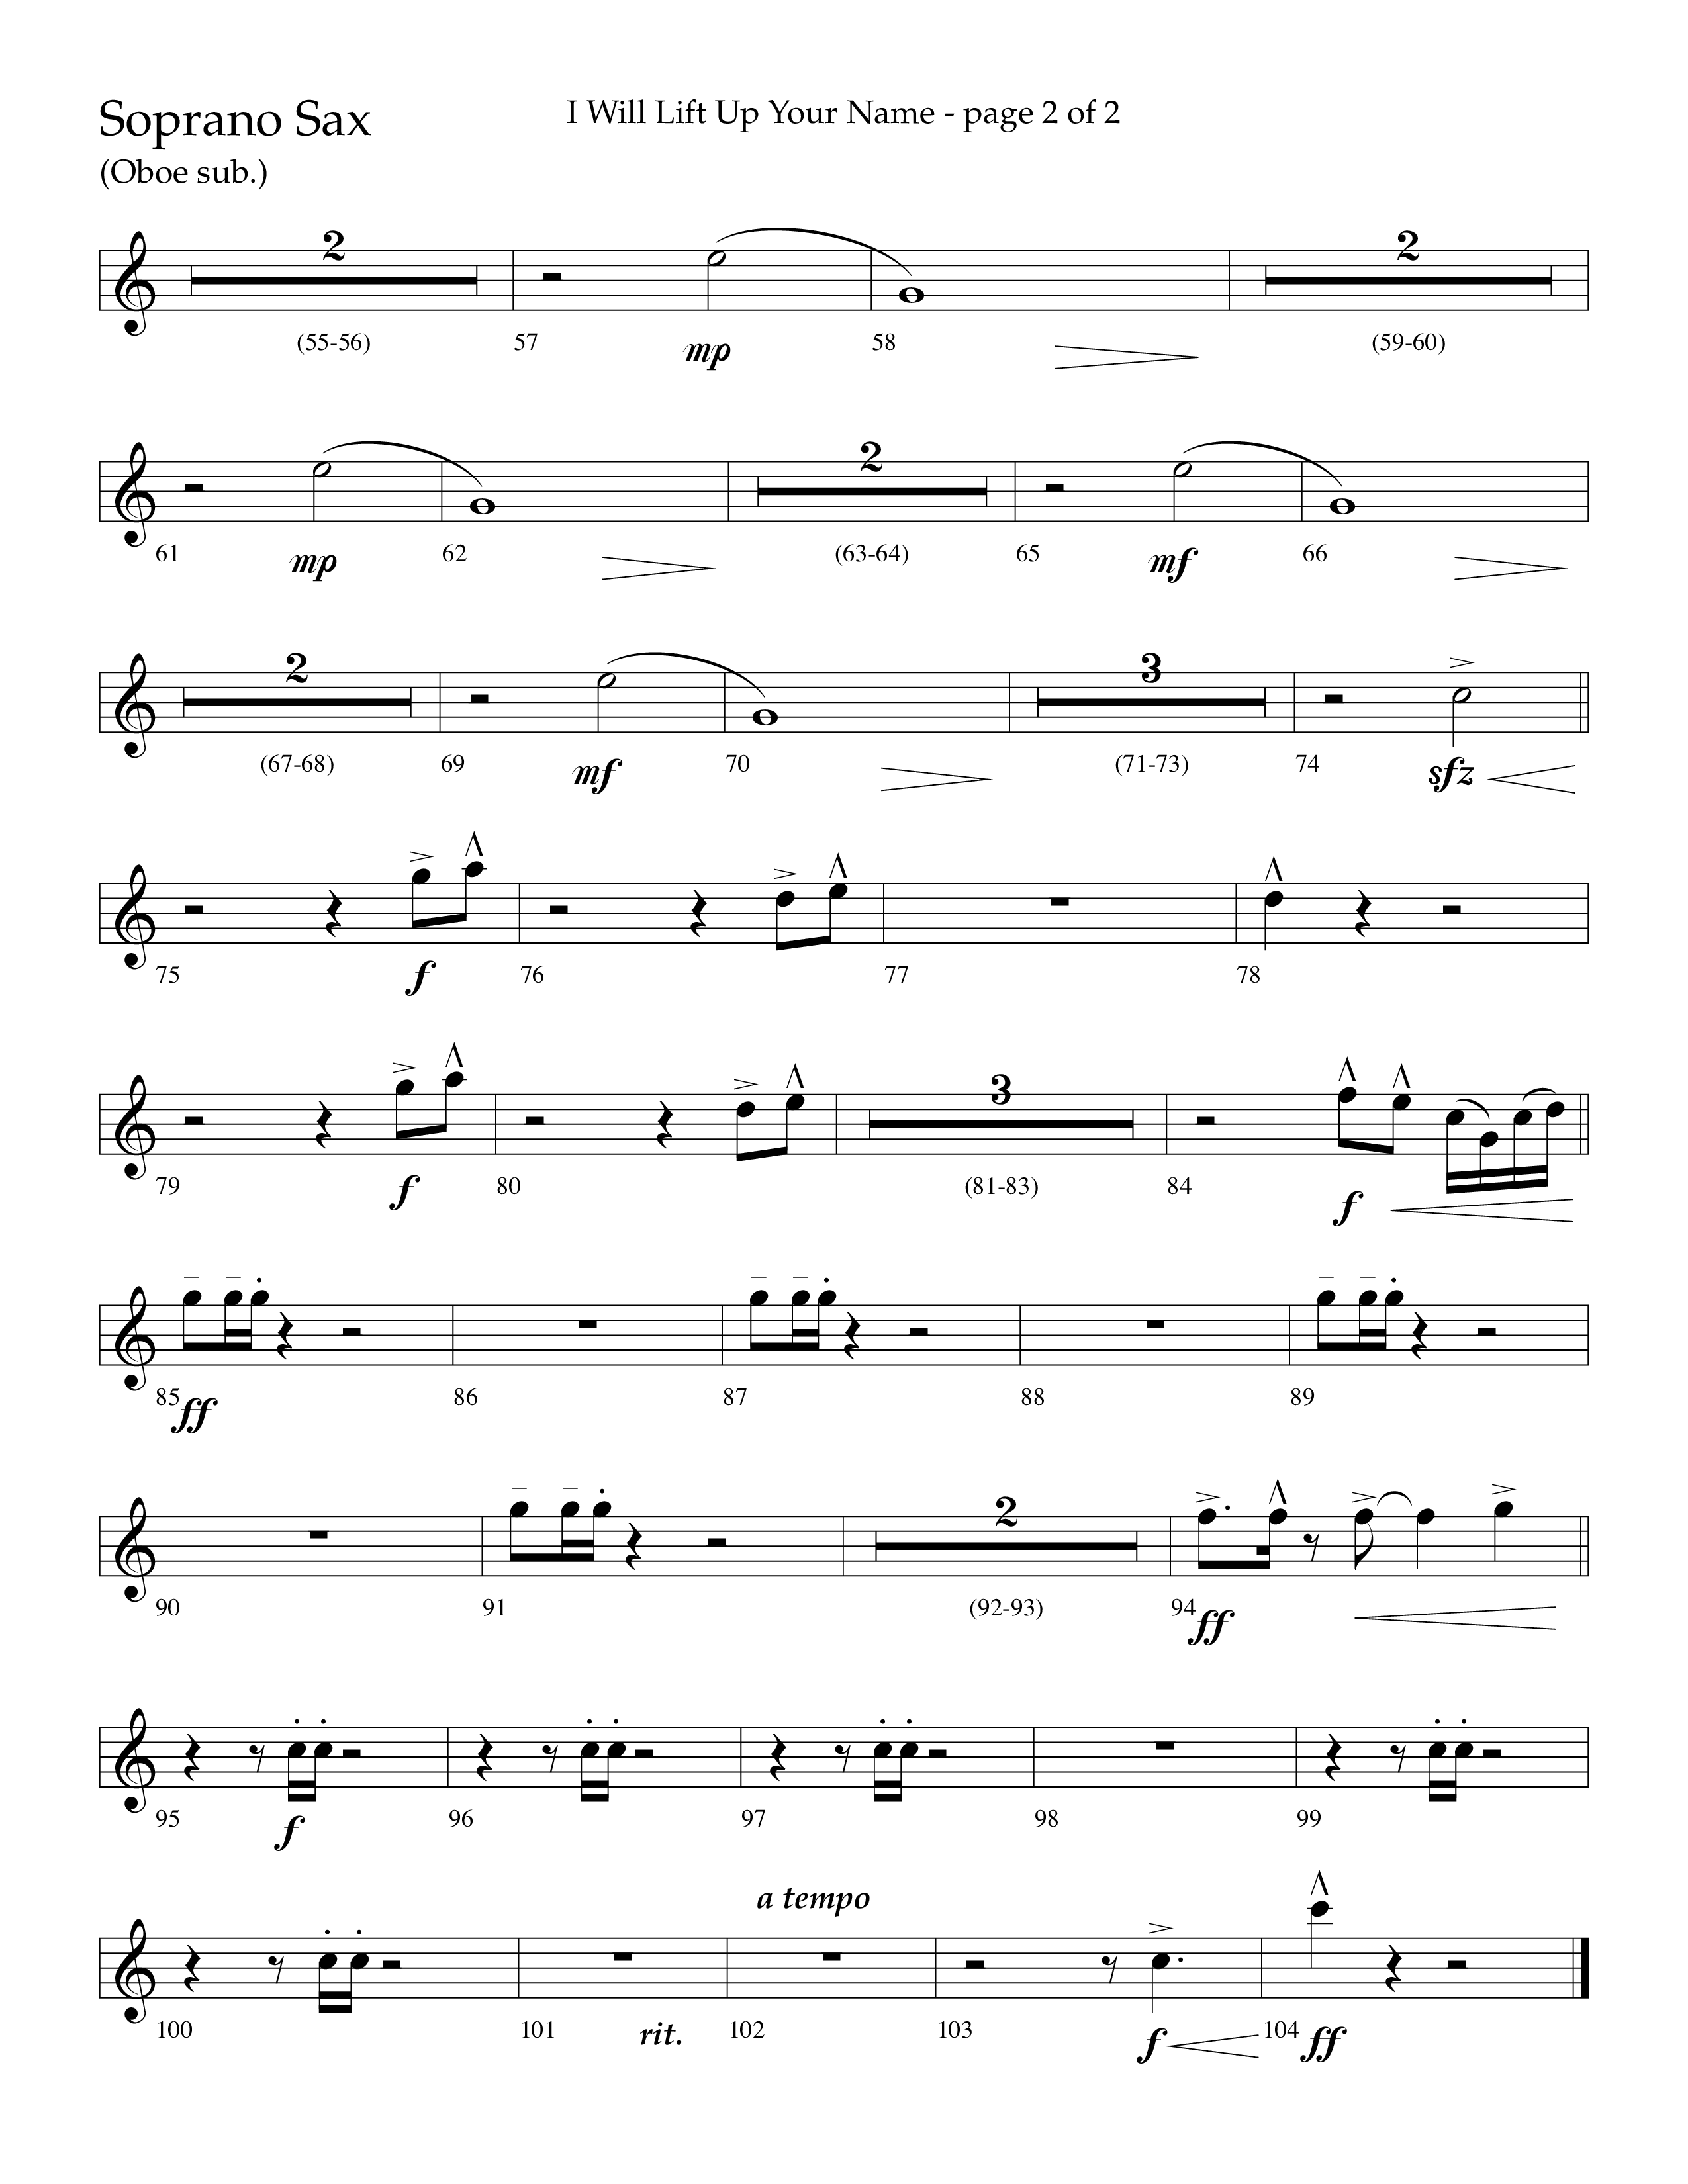 I Will Lift Up Your Name (Choral Anthem SATB) Soprano Sax (Lifeway Choral / Arr. John Bolin / Orch. Cliff Duren)